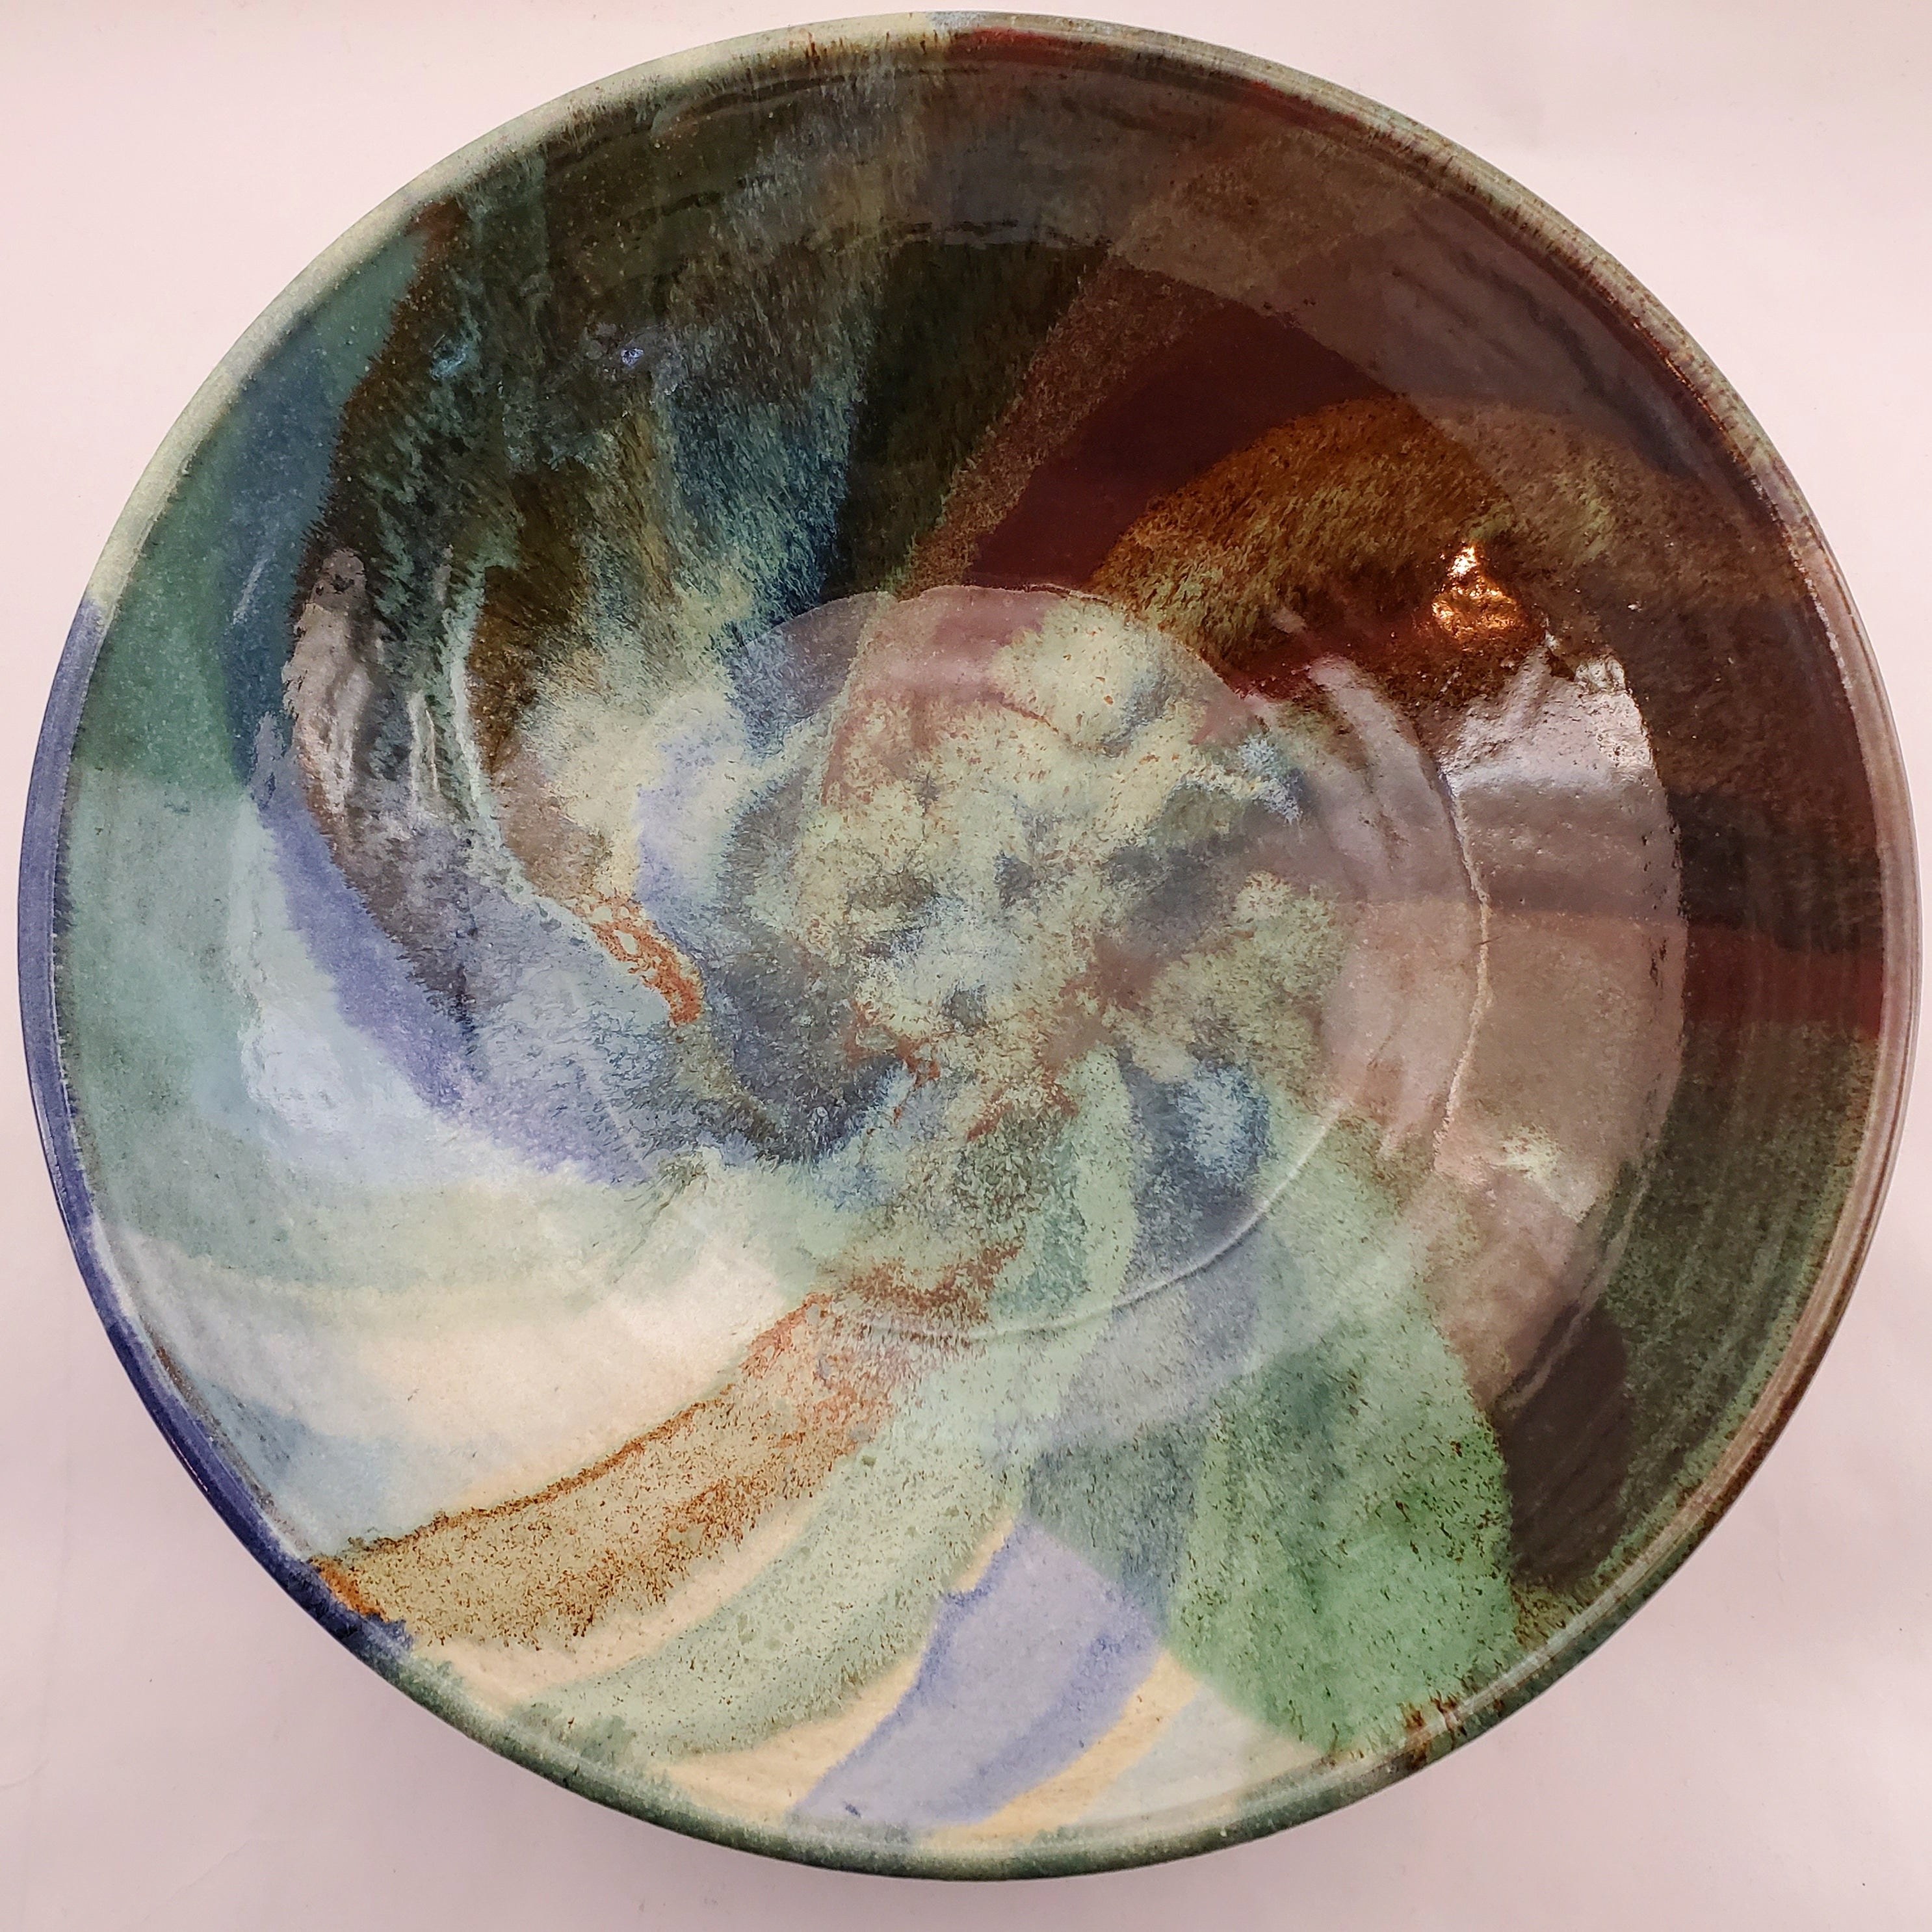 Beautiful, Signature style bowl glazed in blues, greens and browns. Handmade on Vashon Island by Abraham McBride Pottery. Local ceramics artist, Seattle Washington. Small business, Made in the USA. 